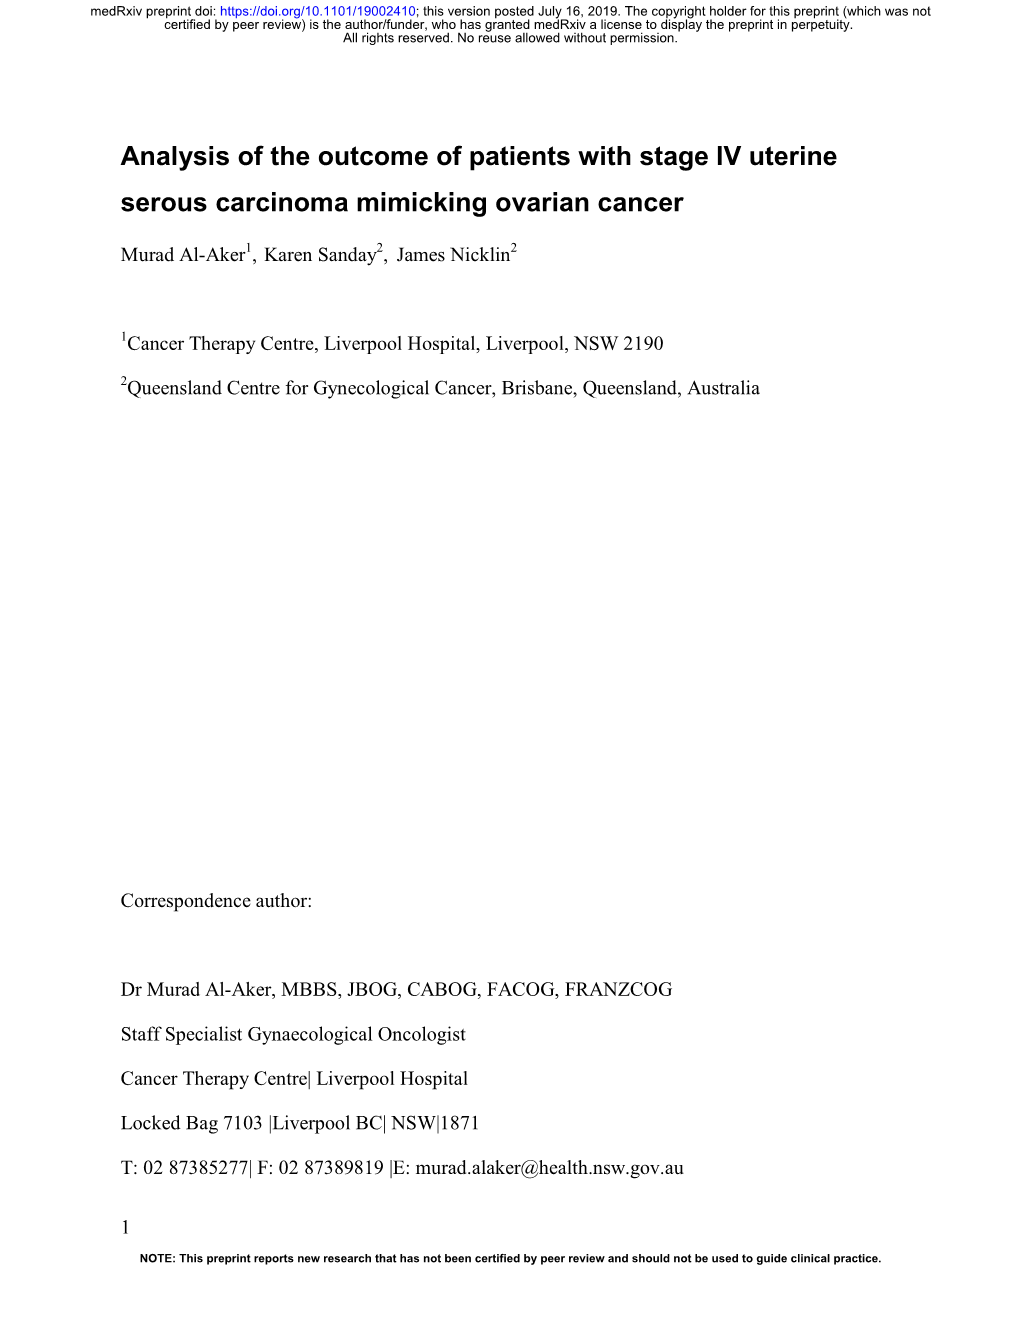 Analysis of the Outcome of Patients with Stage IV Uterine Serous Carcinoma Mimicking Ovarian Cancer